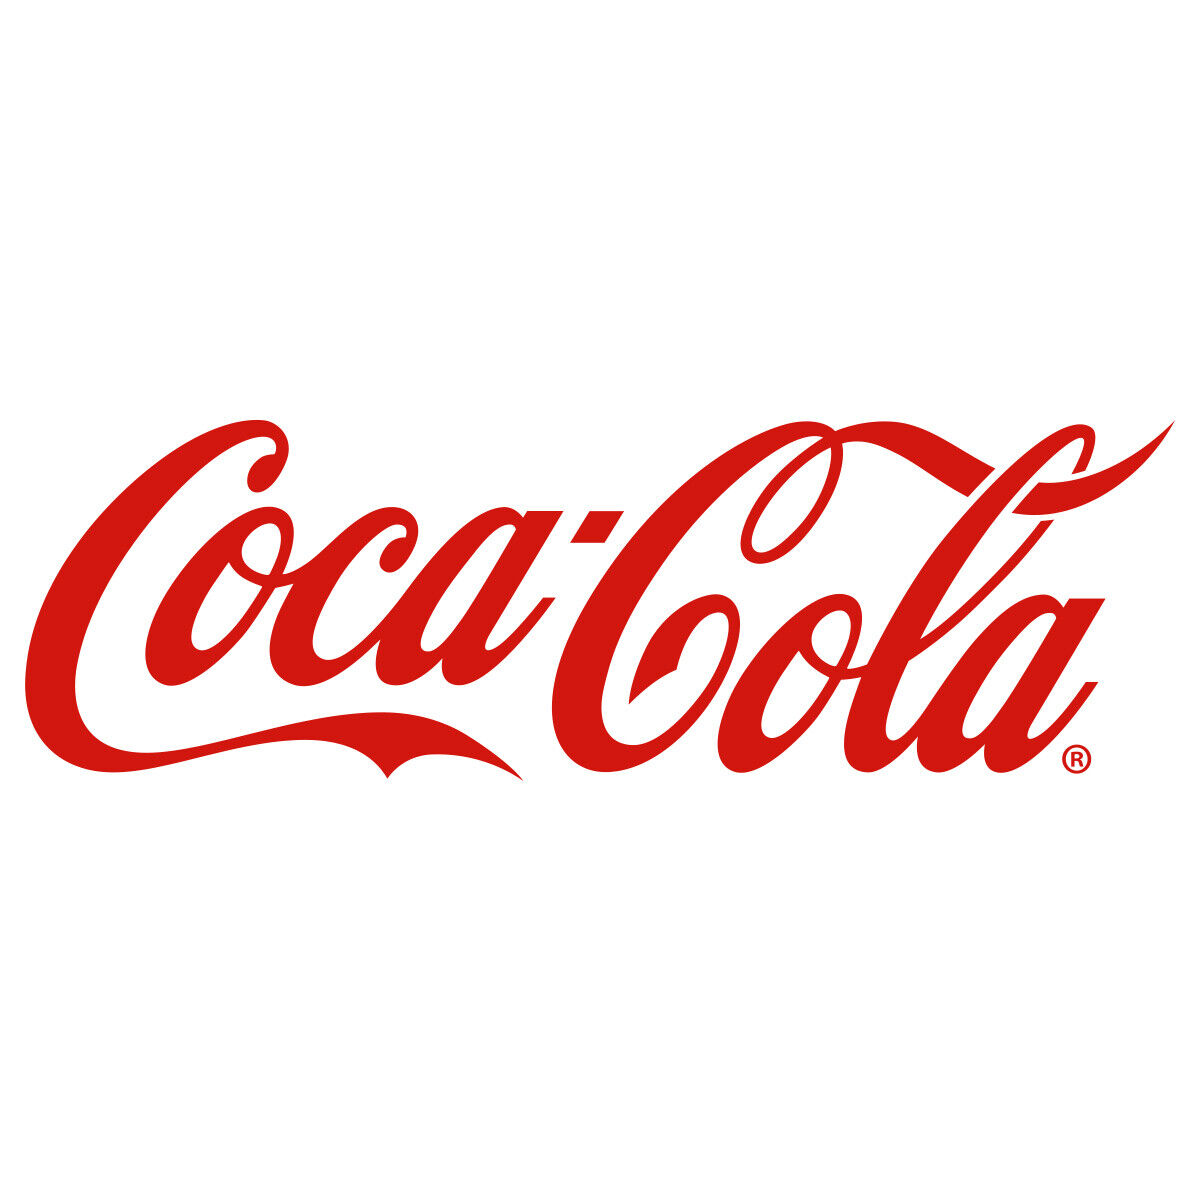 Coca-Cola Script Logo Cut Out Decal 1910s Style Officially Licensed by Coca-Cola